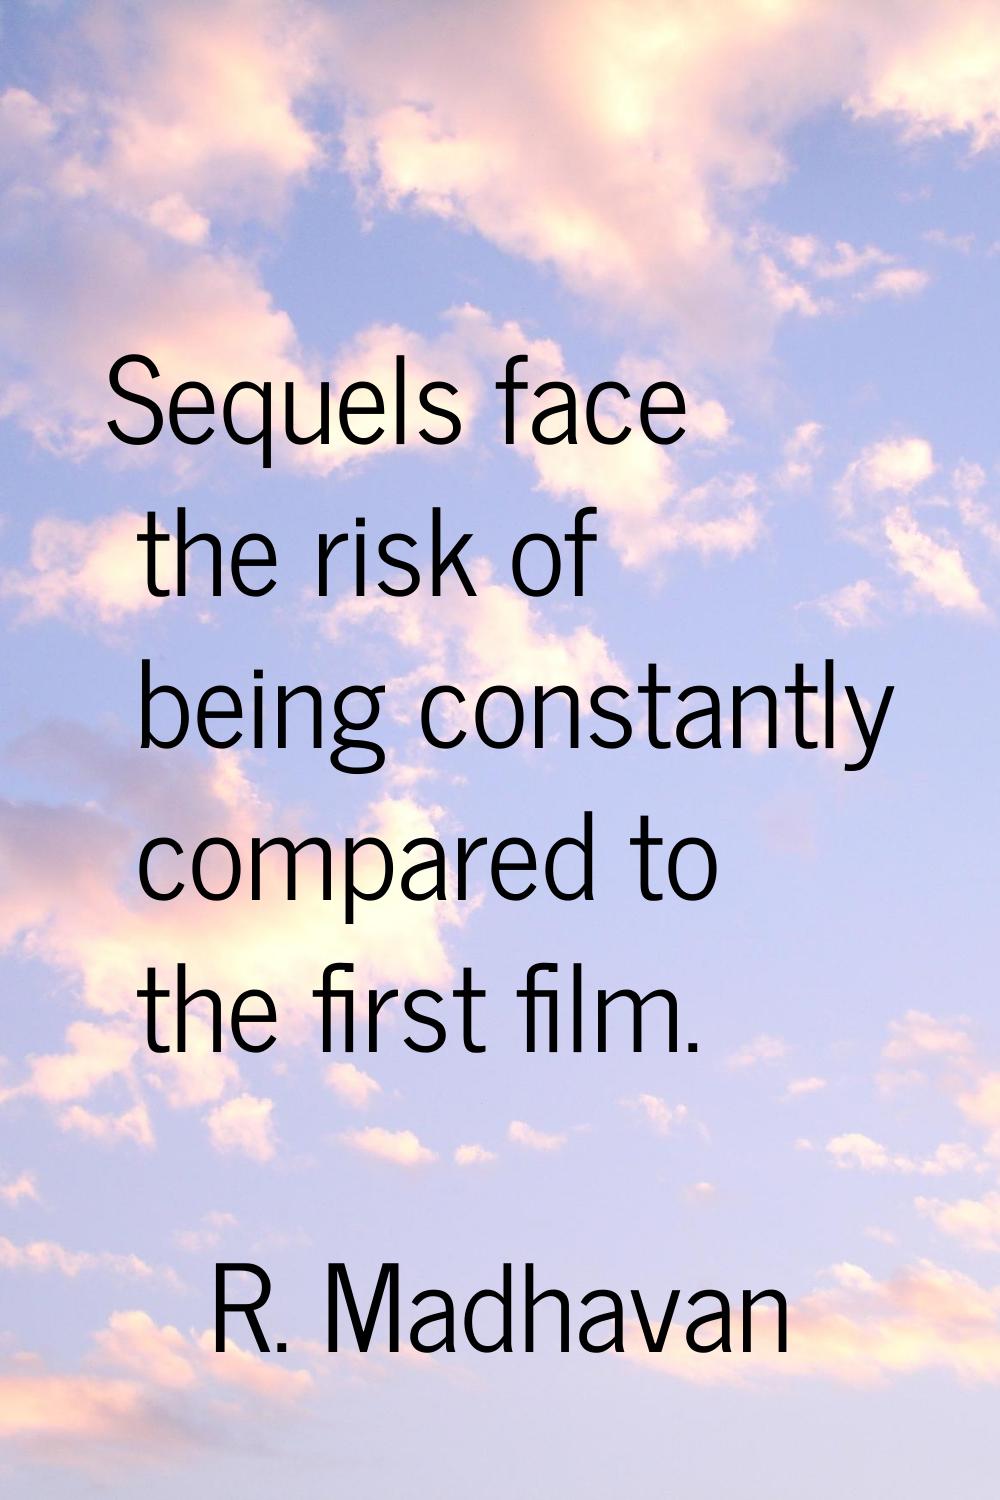 Sequels face the risk of being constantly compared to the first film.